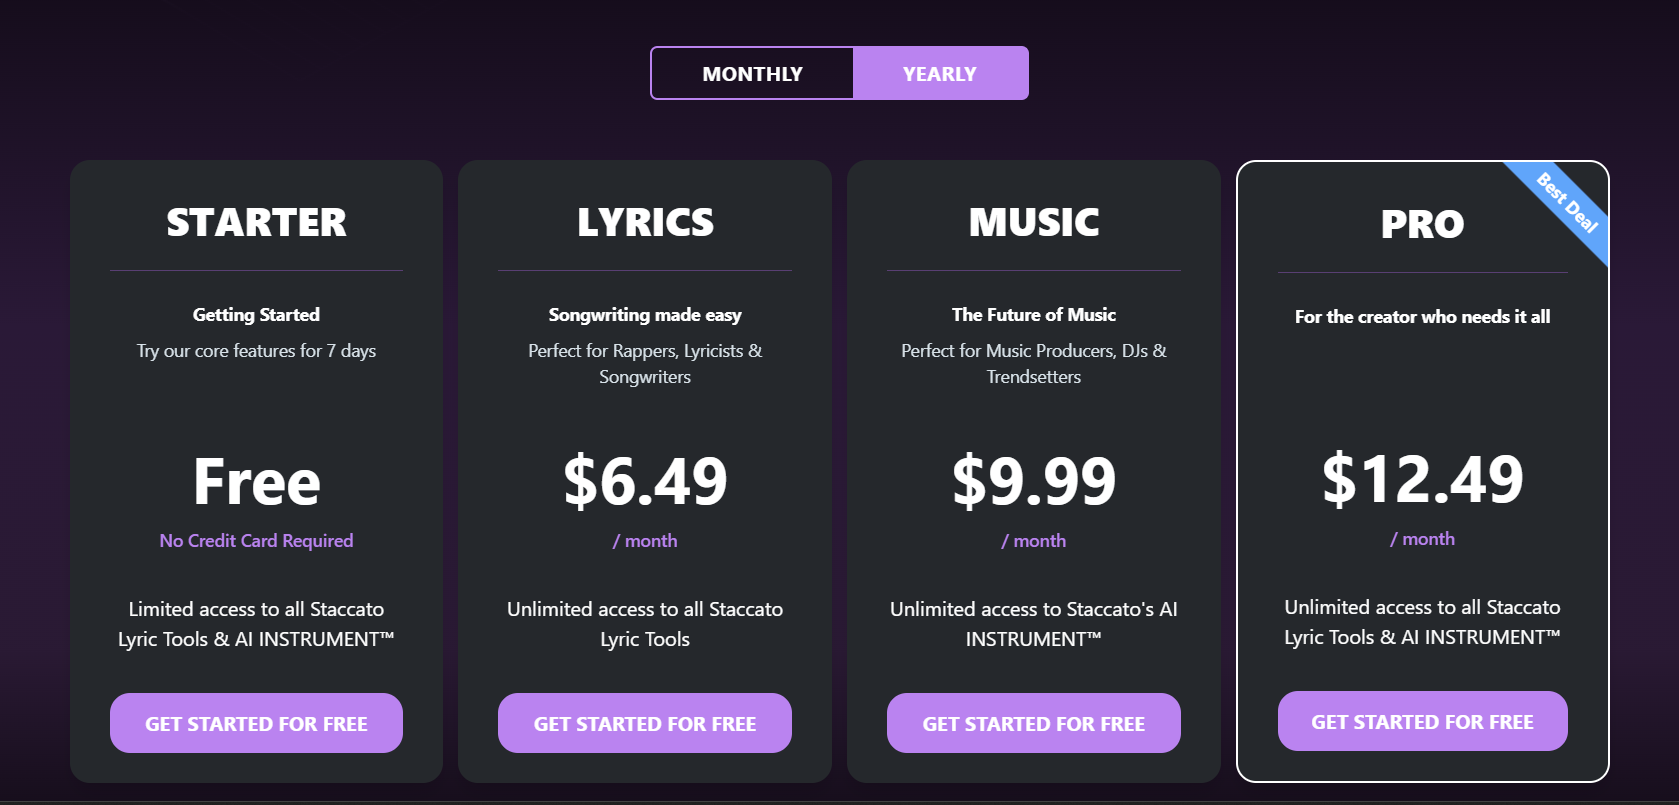 The pricing options for Staccato - from free to $12.49 per month.